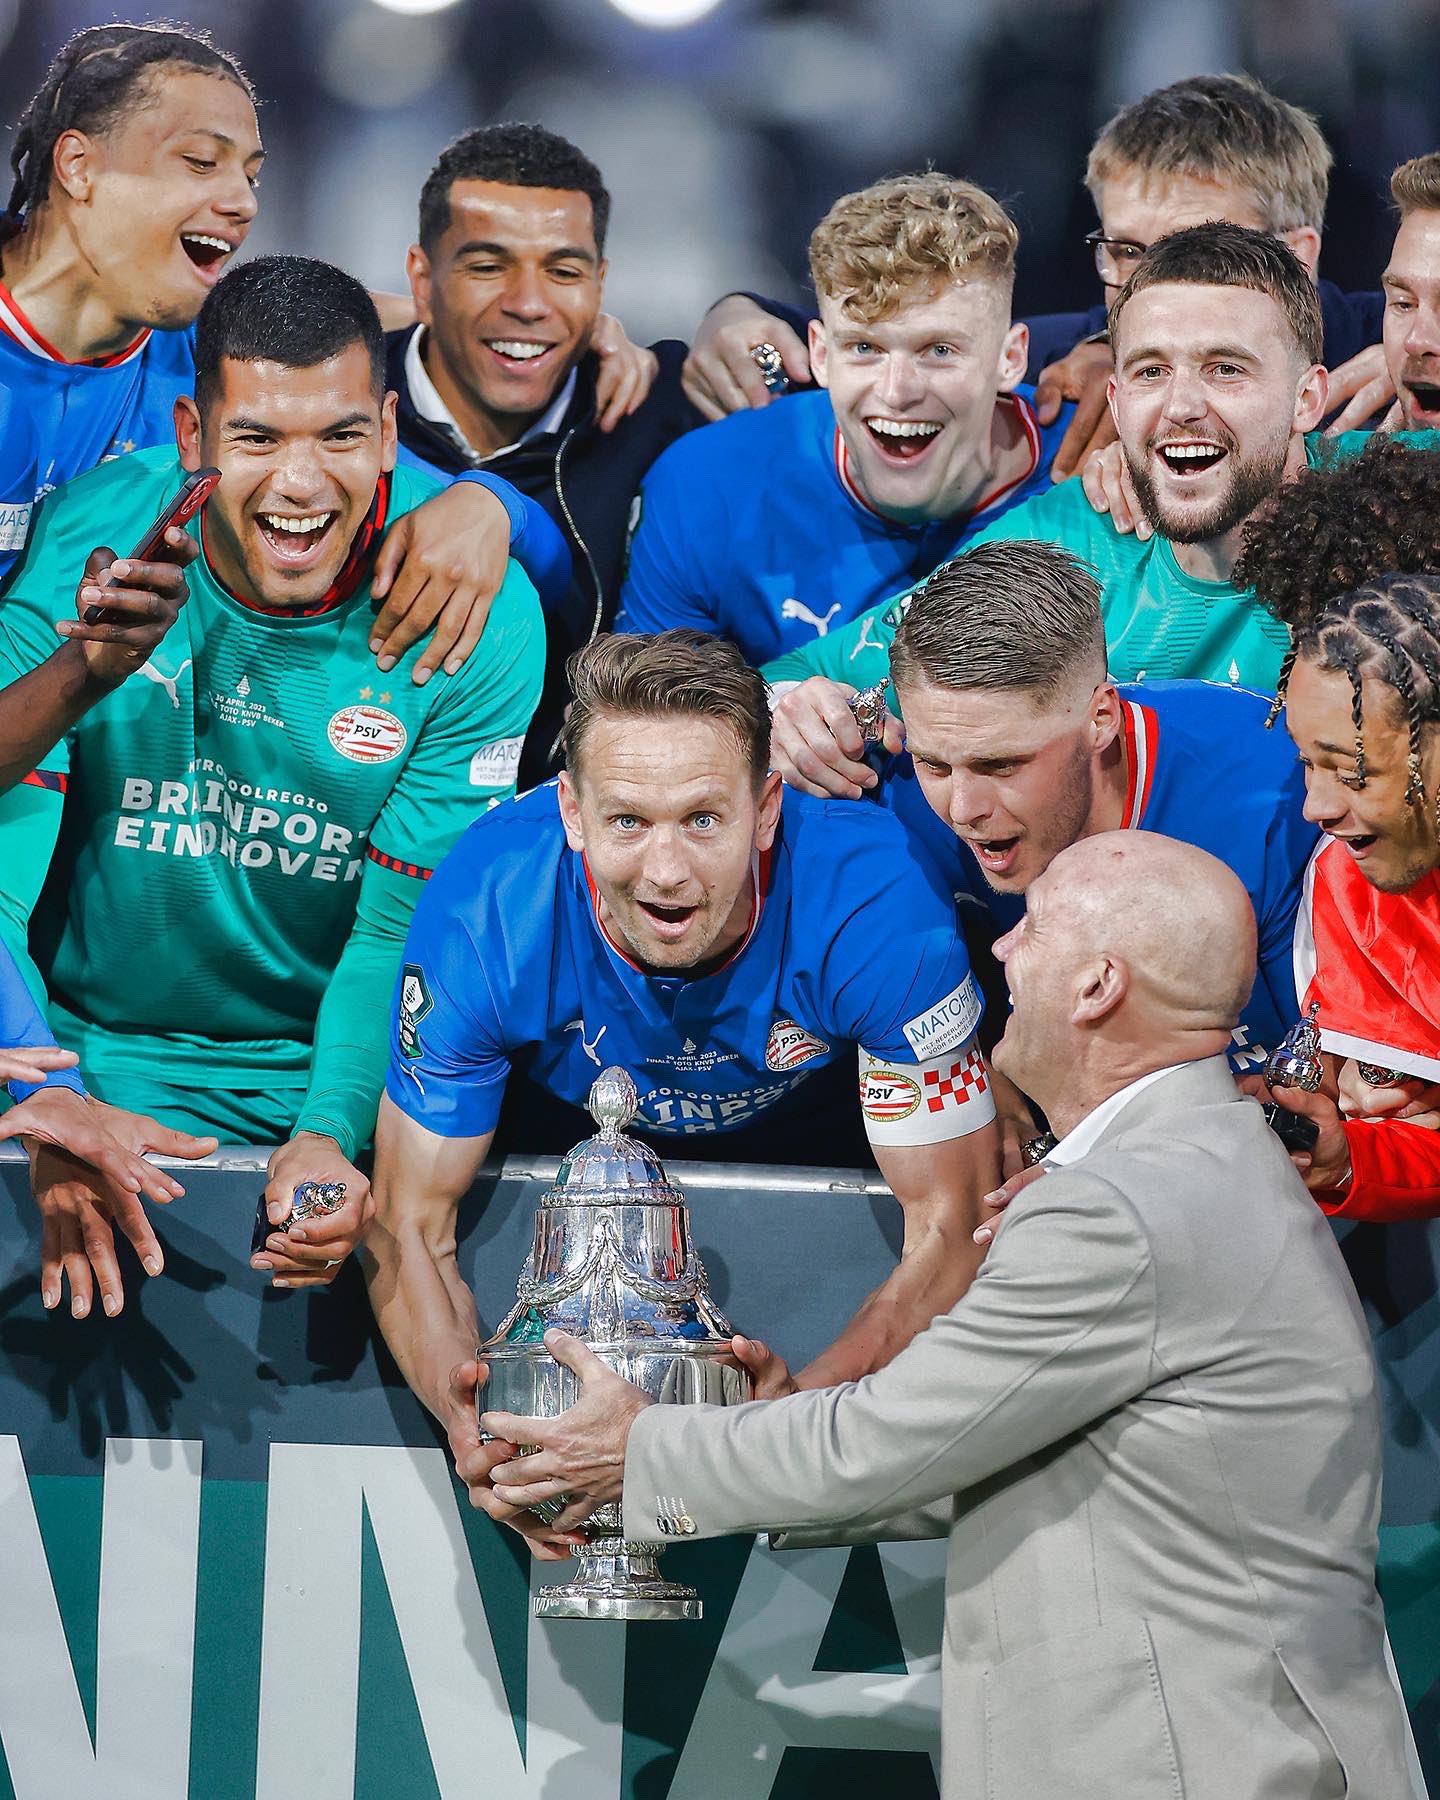 PSV beat Ajax on penalties to win the KNVB Beker